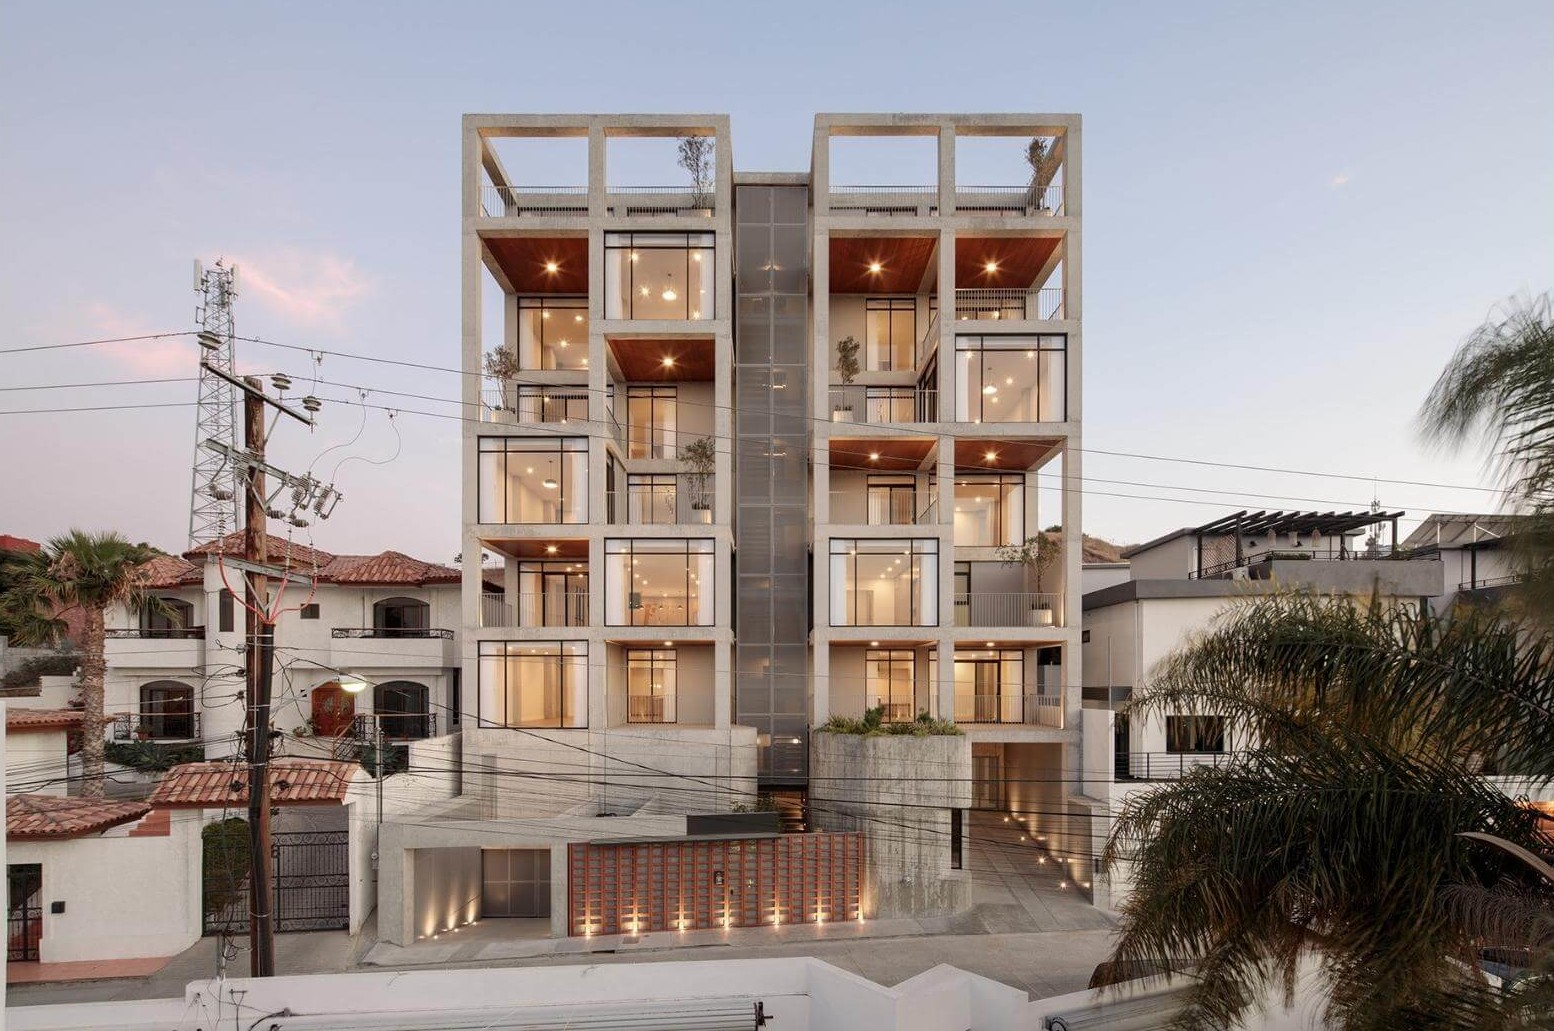 a stacked multi-family home in tijuana